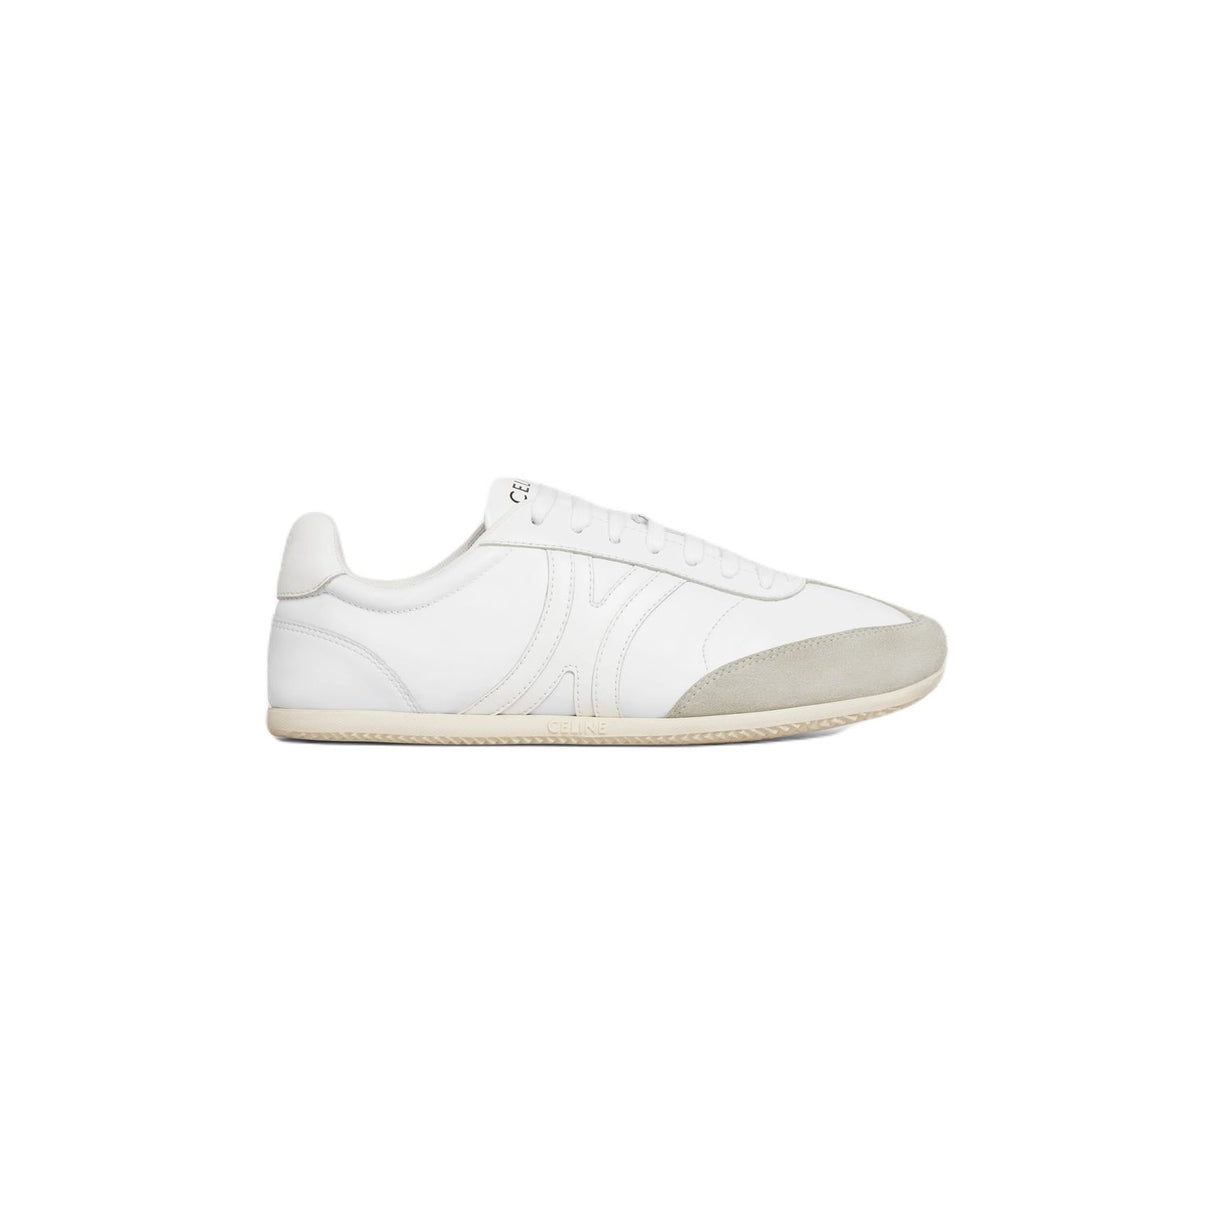 CELINE Low Lace-Up Triomphe Sneaker in White Calfskin with Grey Suede Inserts for Women